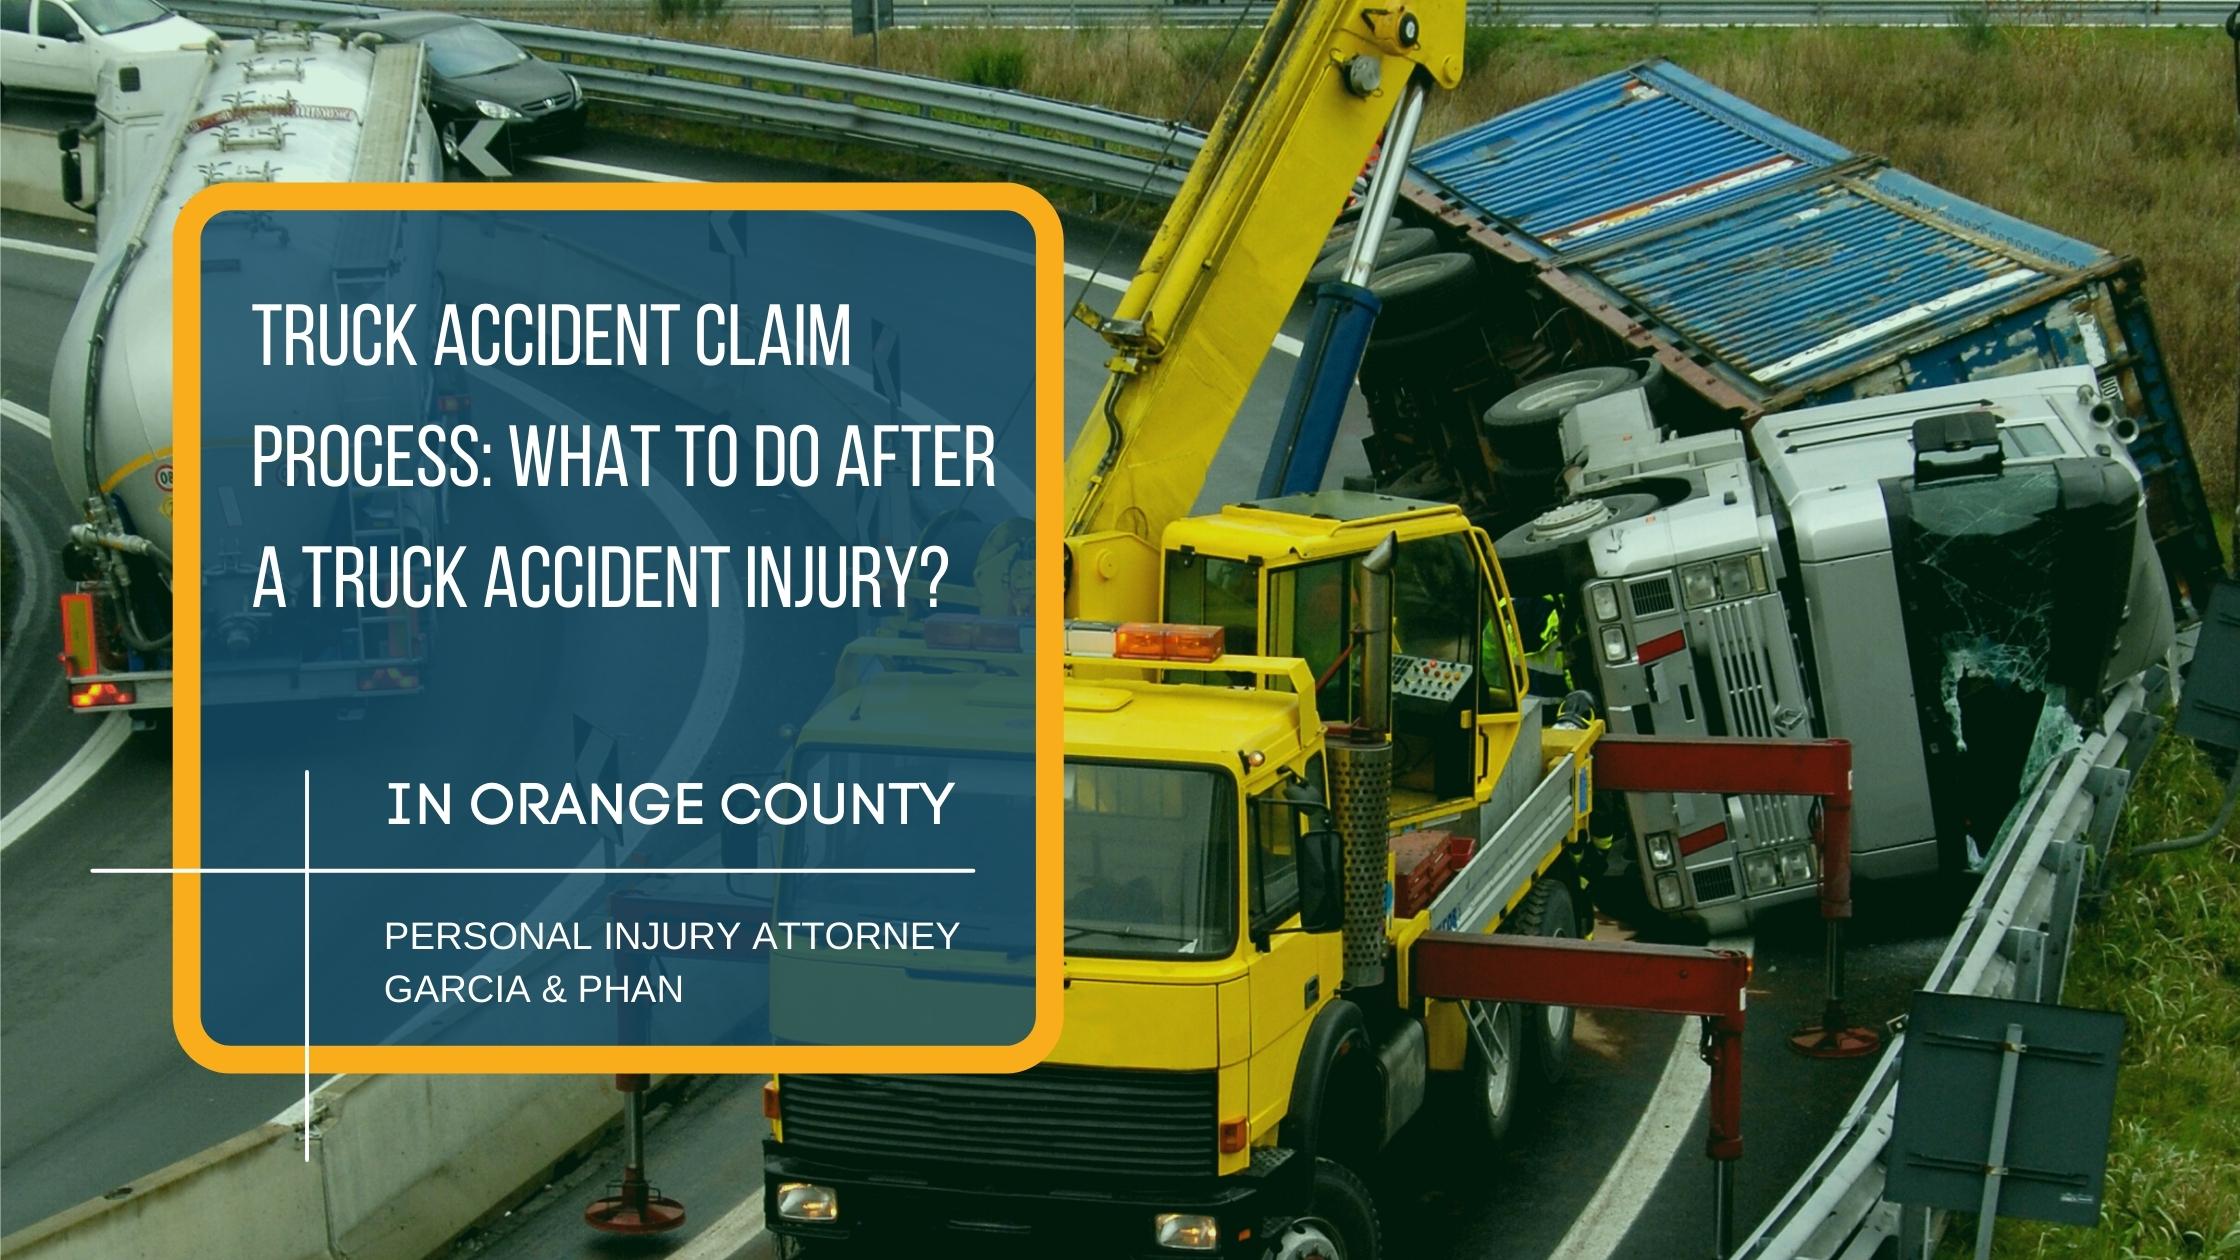 Truck Accident Claims | Garcia & Phan Attorney